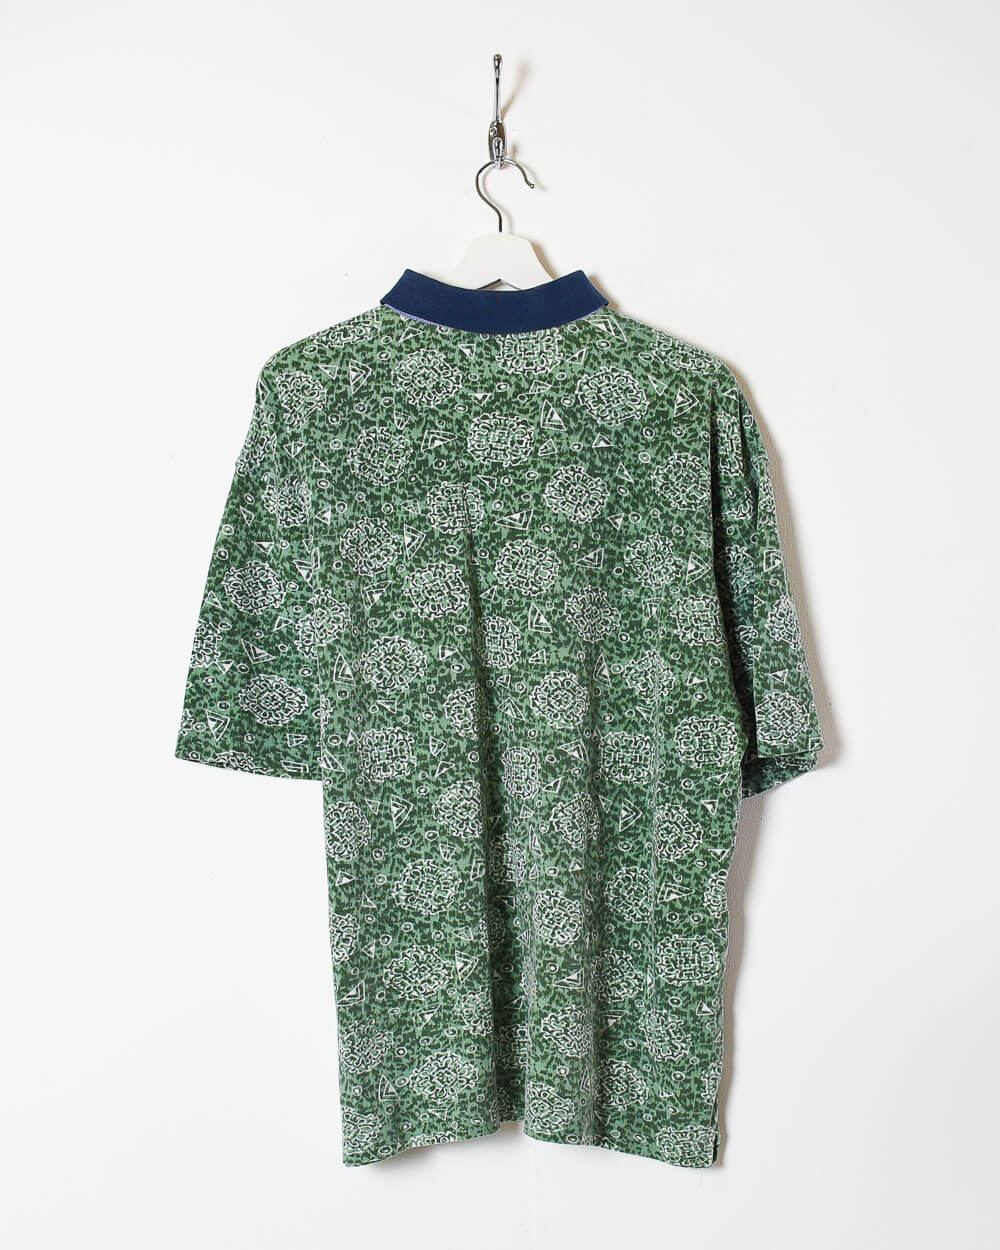 Green Vintage Patterned Polo Shirt - X-Large